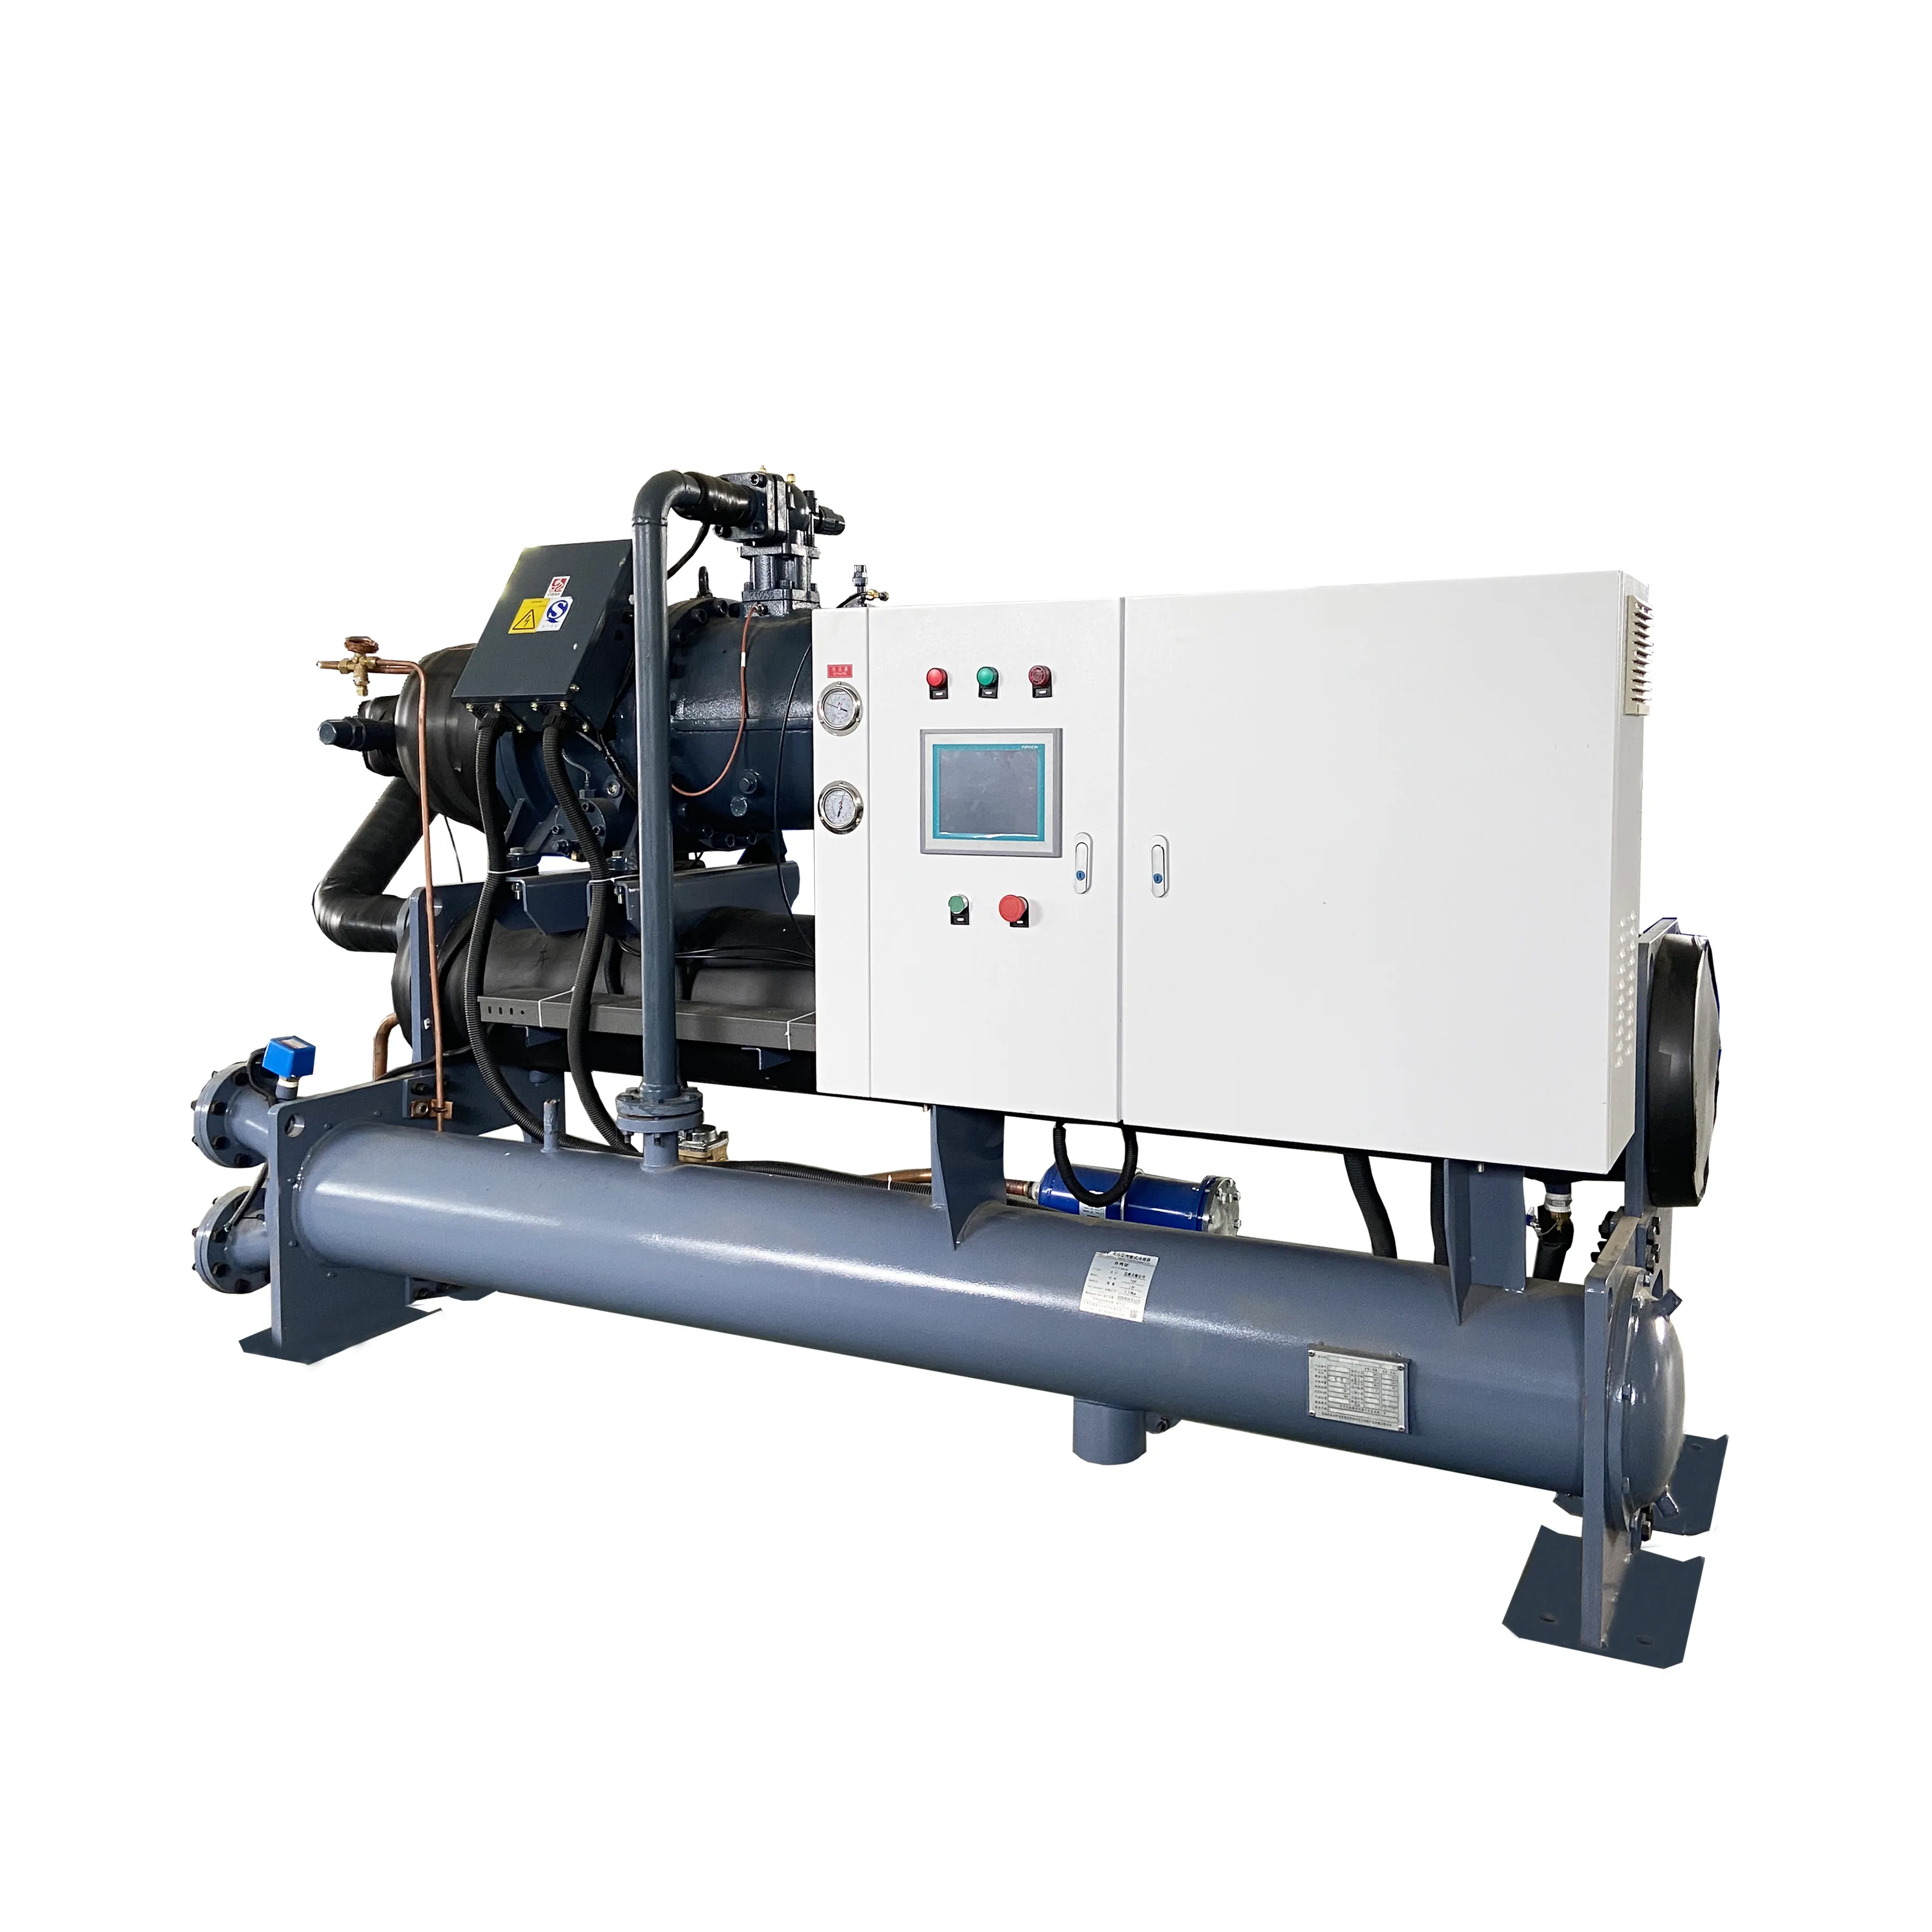 R134A/R407C / condensing unit Process chiller water chiller system